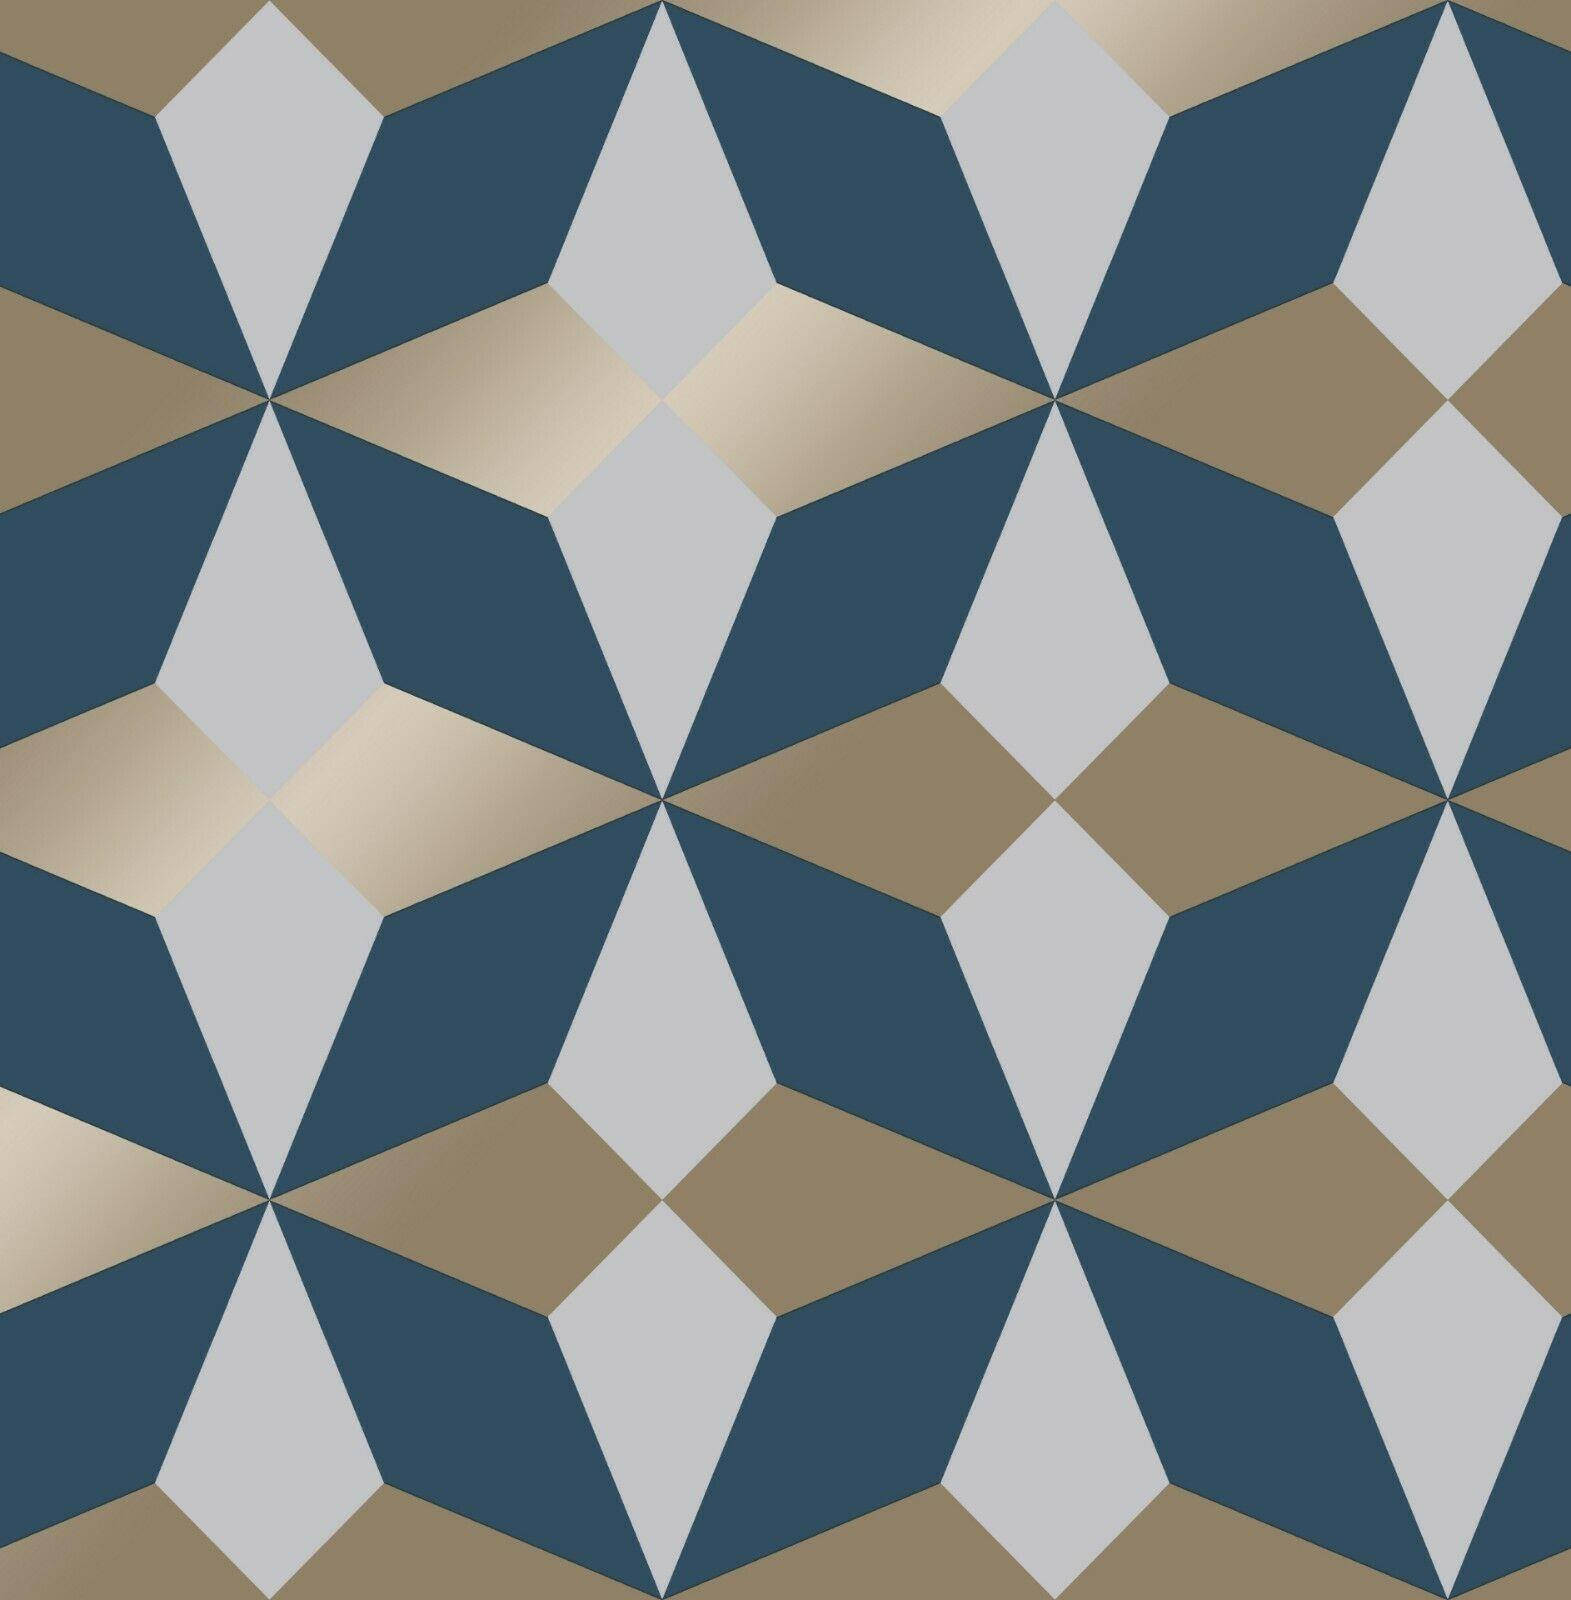 Caption: Splendid Display Of Blue And Gold Pattern Wallpaper